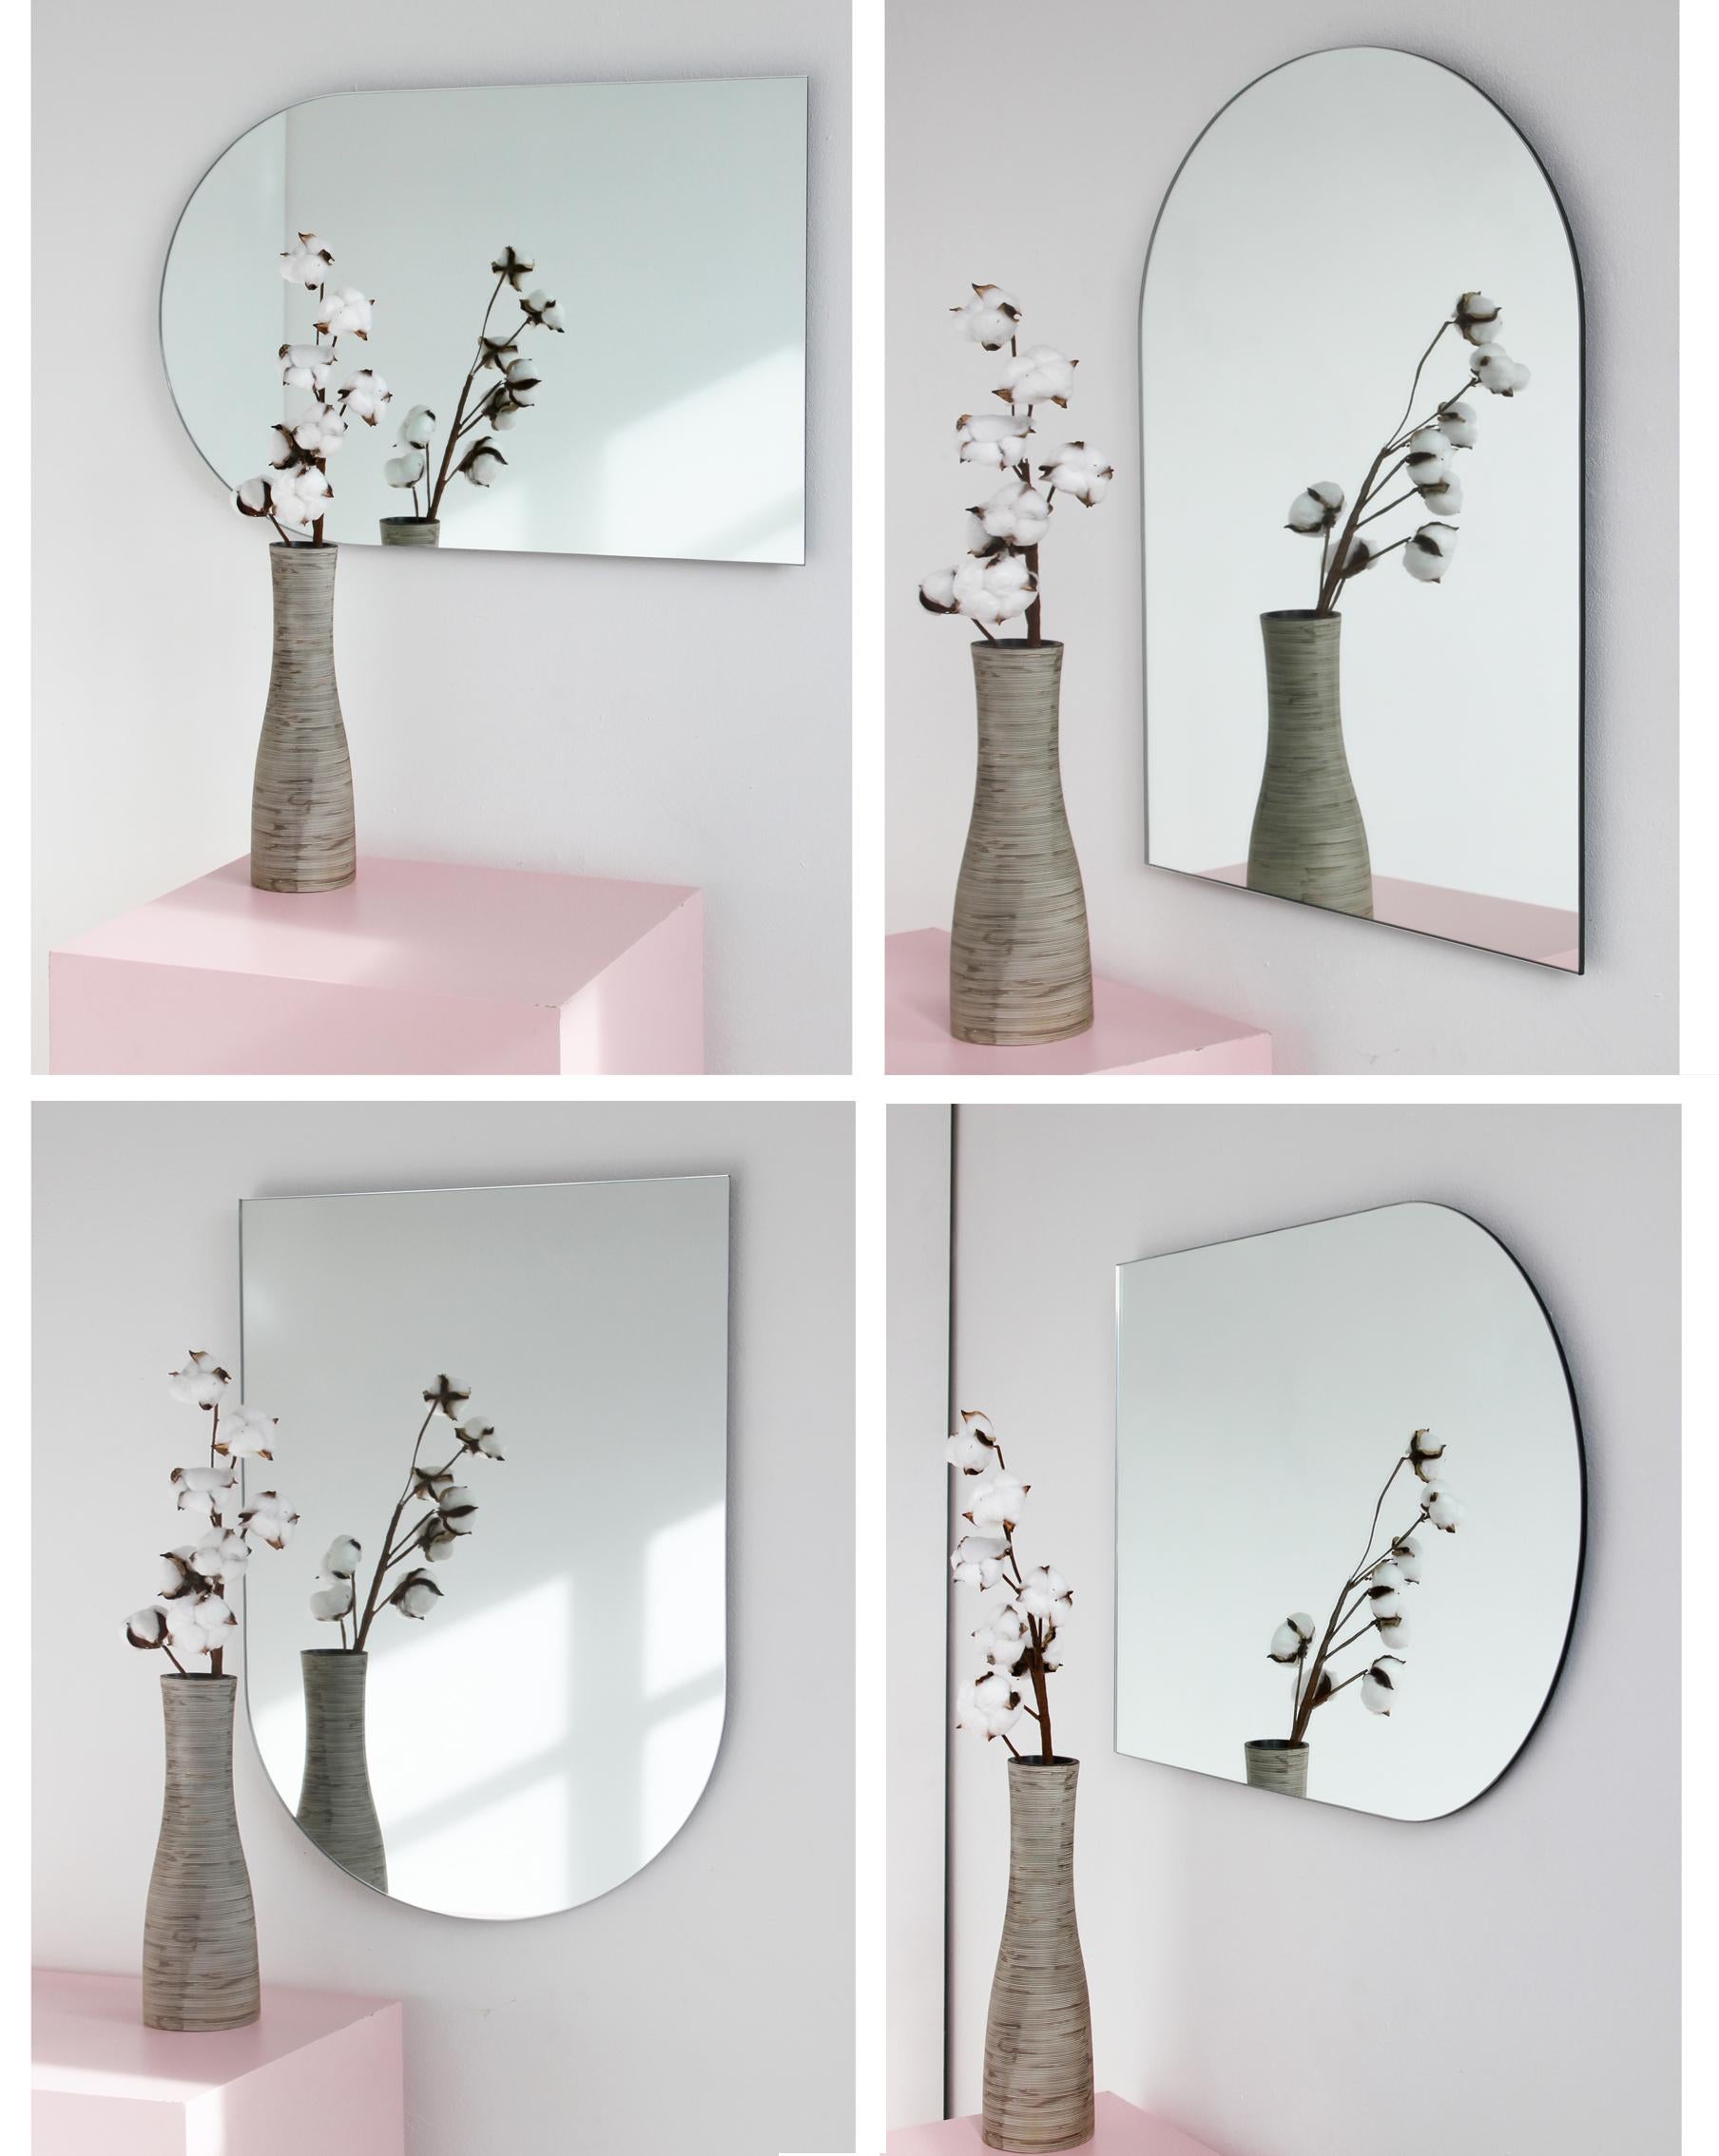 Minimalist Arcus™ arch shaped frameless mirror that can be hung in 4 different positions. Quality design that ensures the mirror sits perfectly parallel to the wall. Designed and made in London, UK.

Fitted with professional plates not visible once